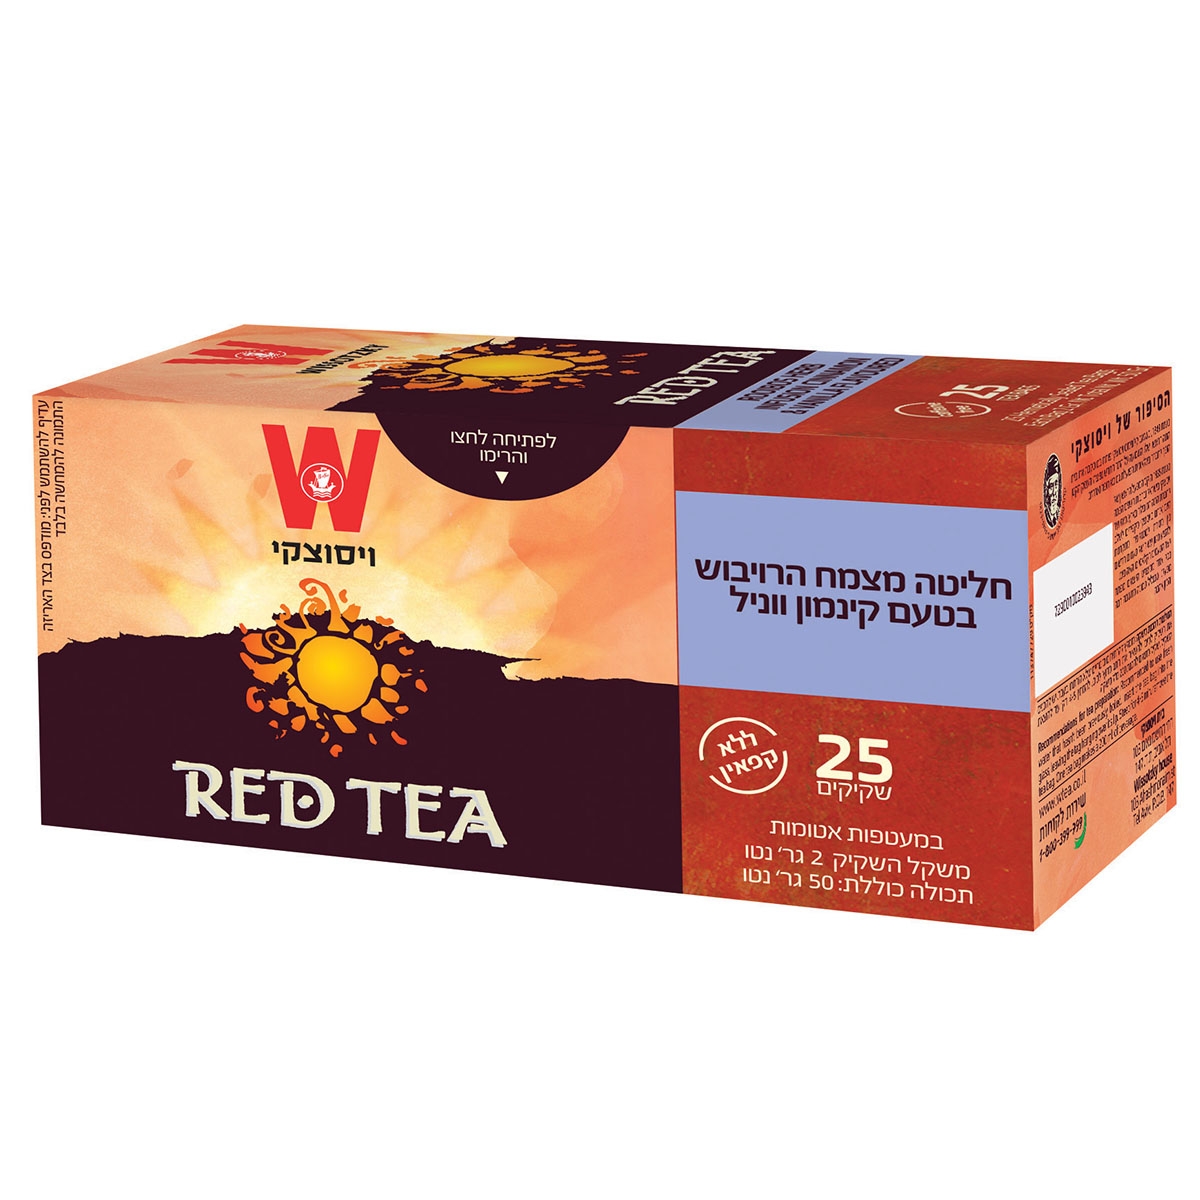 Wissotzky Red Tea. Rooibos Herb Infusion with Cinnamon & Vanilla - 1